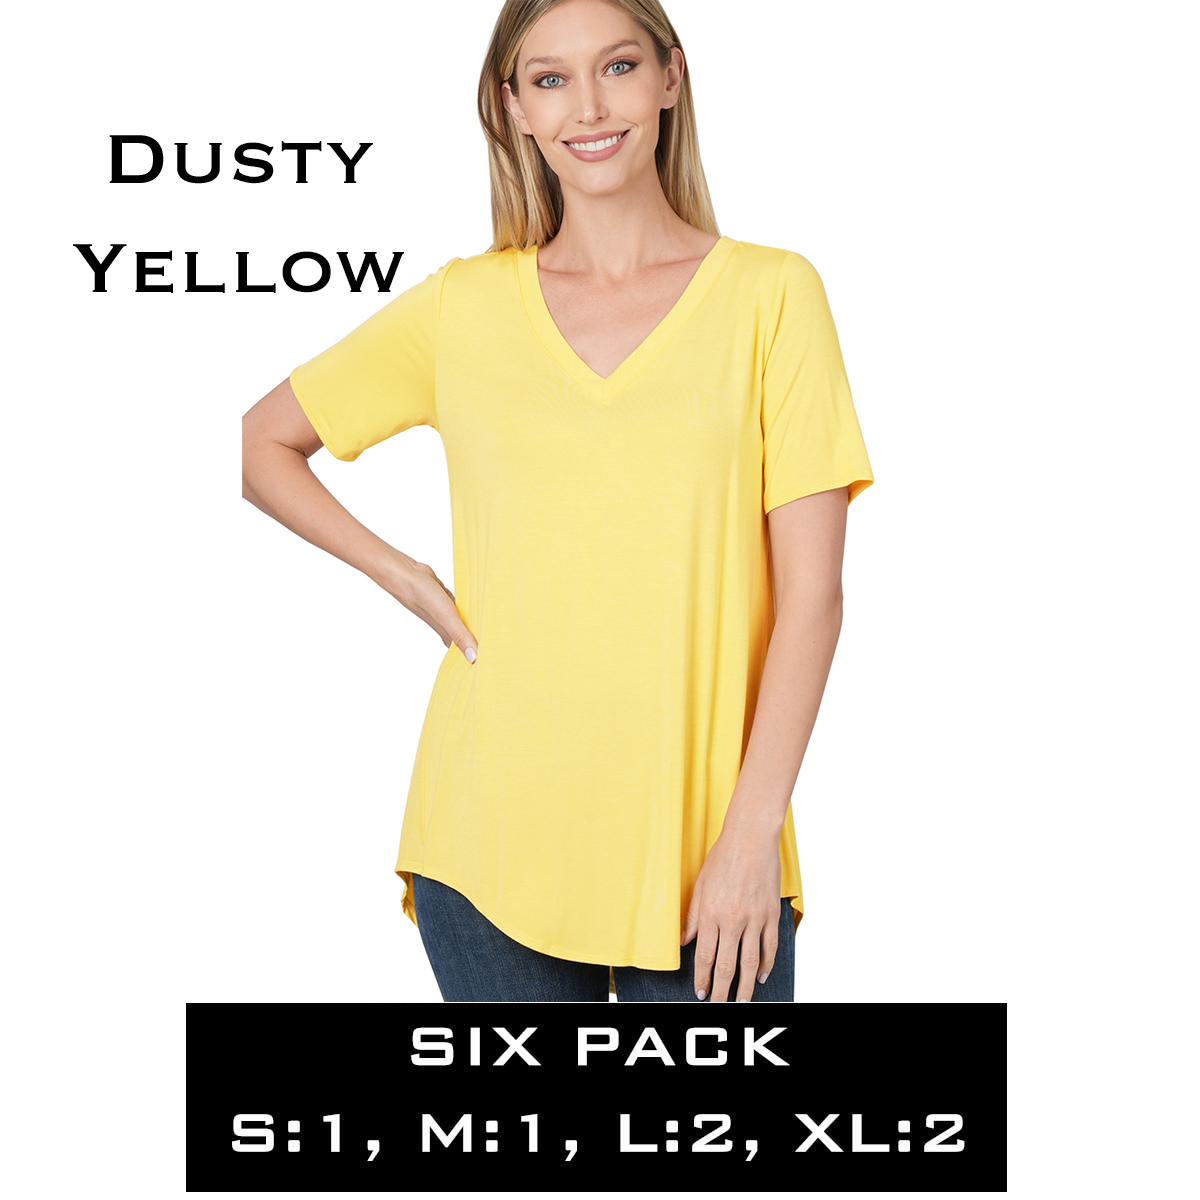 5541 - Dusty Yellow - Six Pack